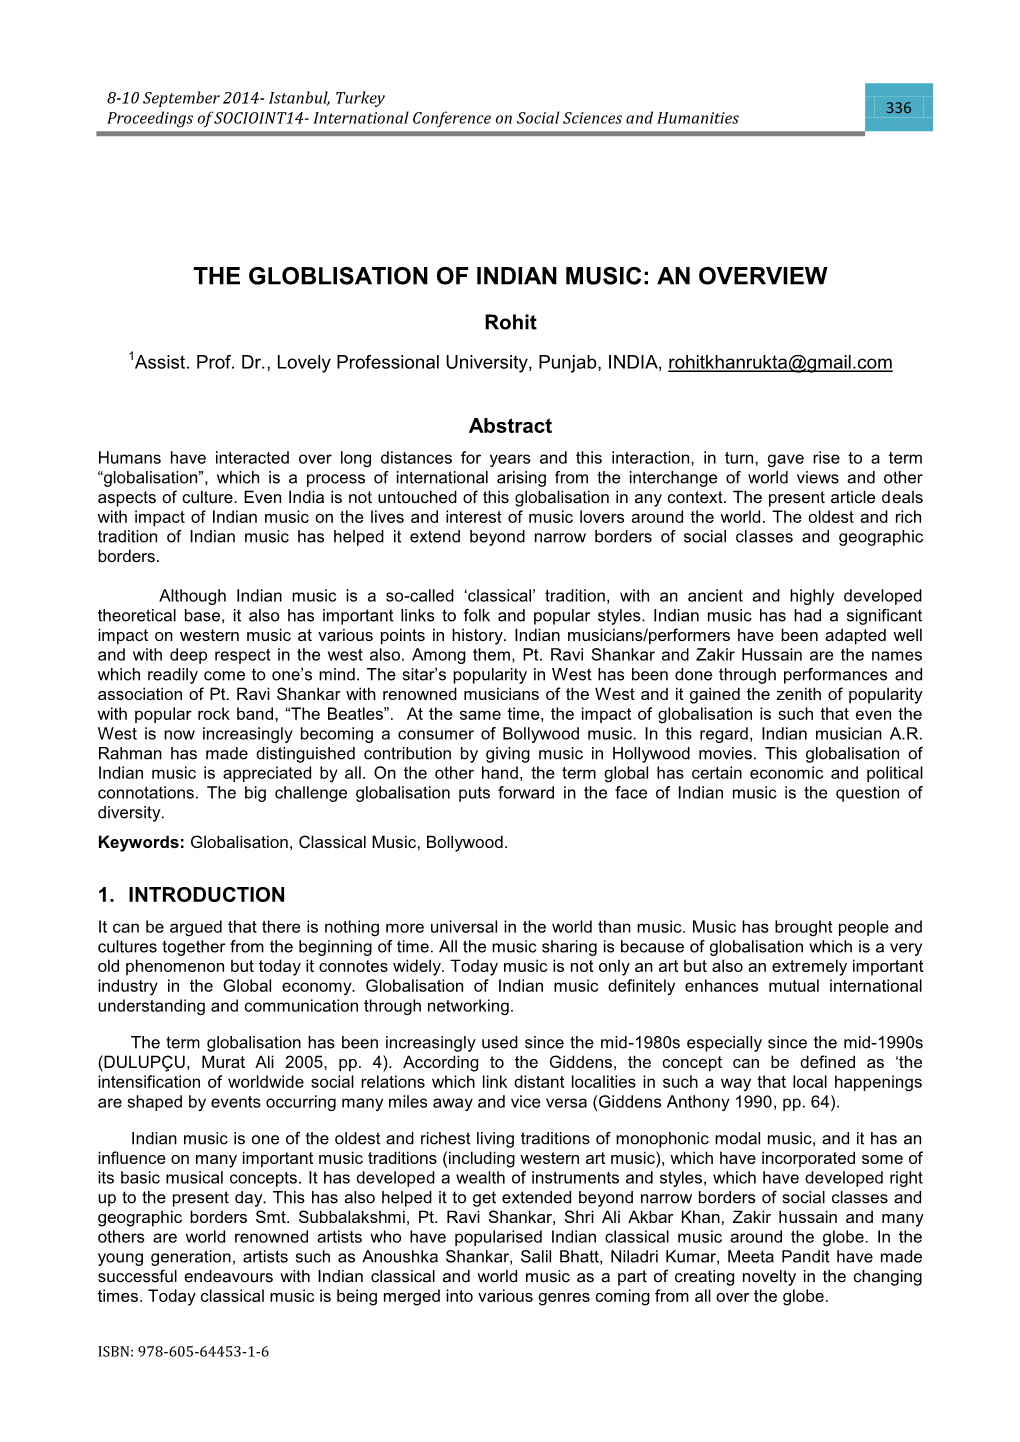 The Globlisation of Indian Music: an Overview